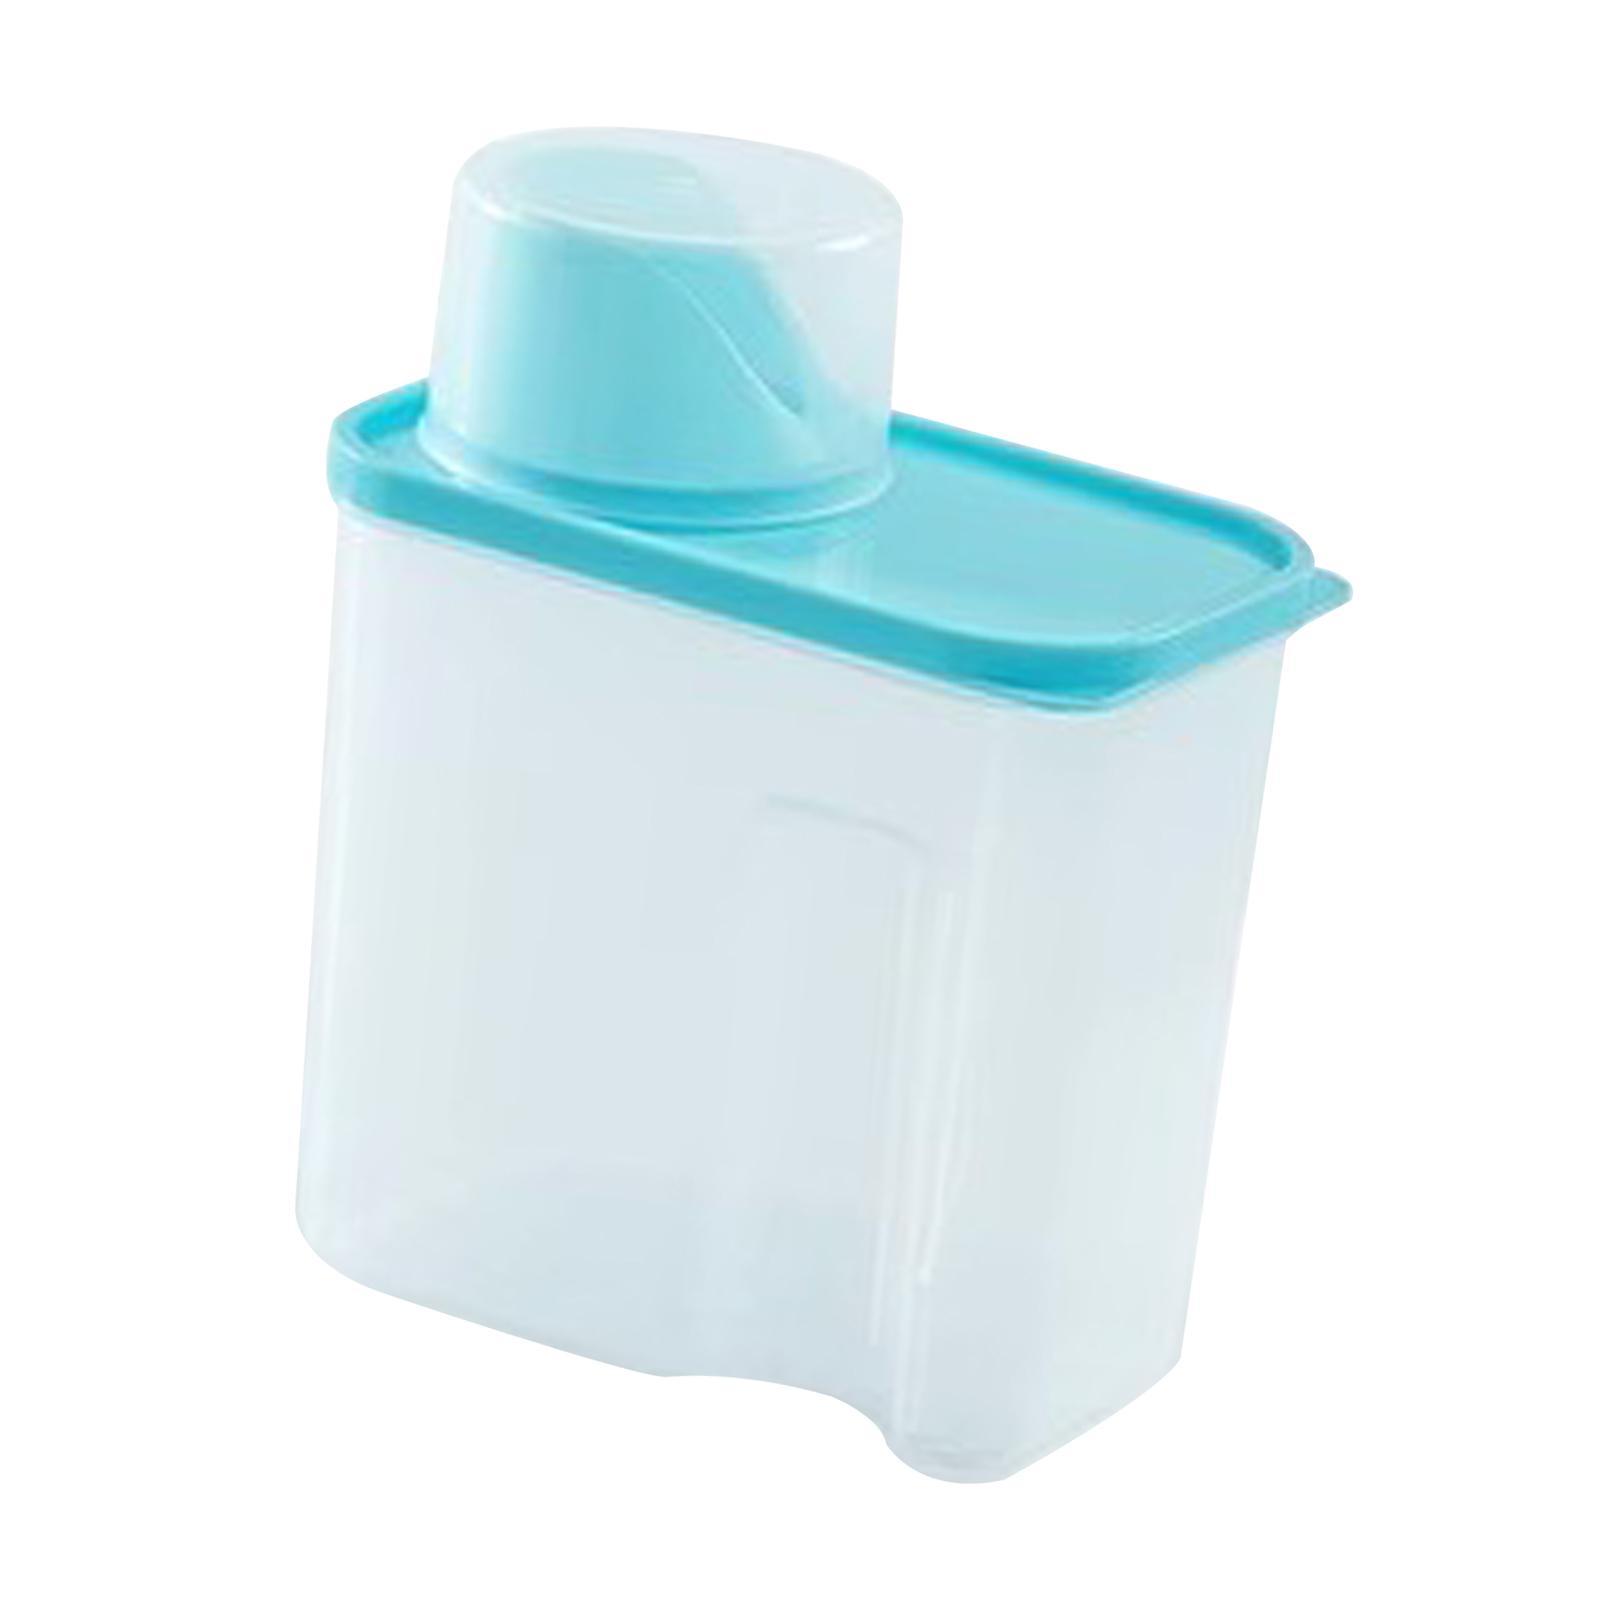 Washing Powder Containers Clear Laundry Powder Storage Box for Closet Cabinet